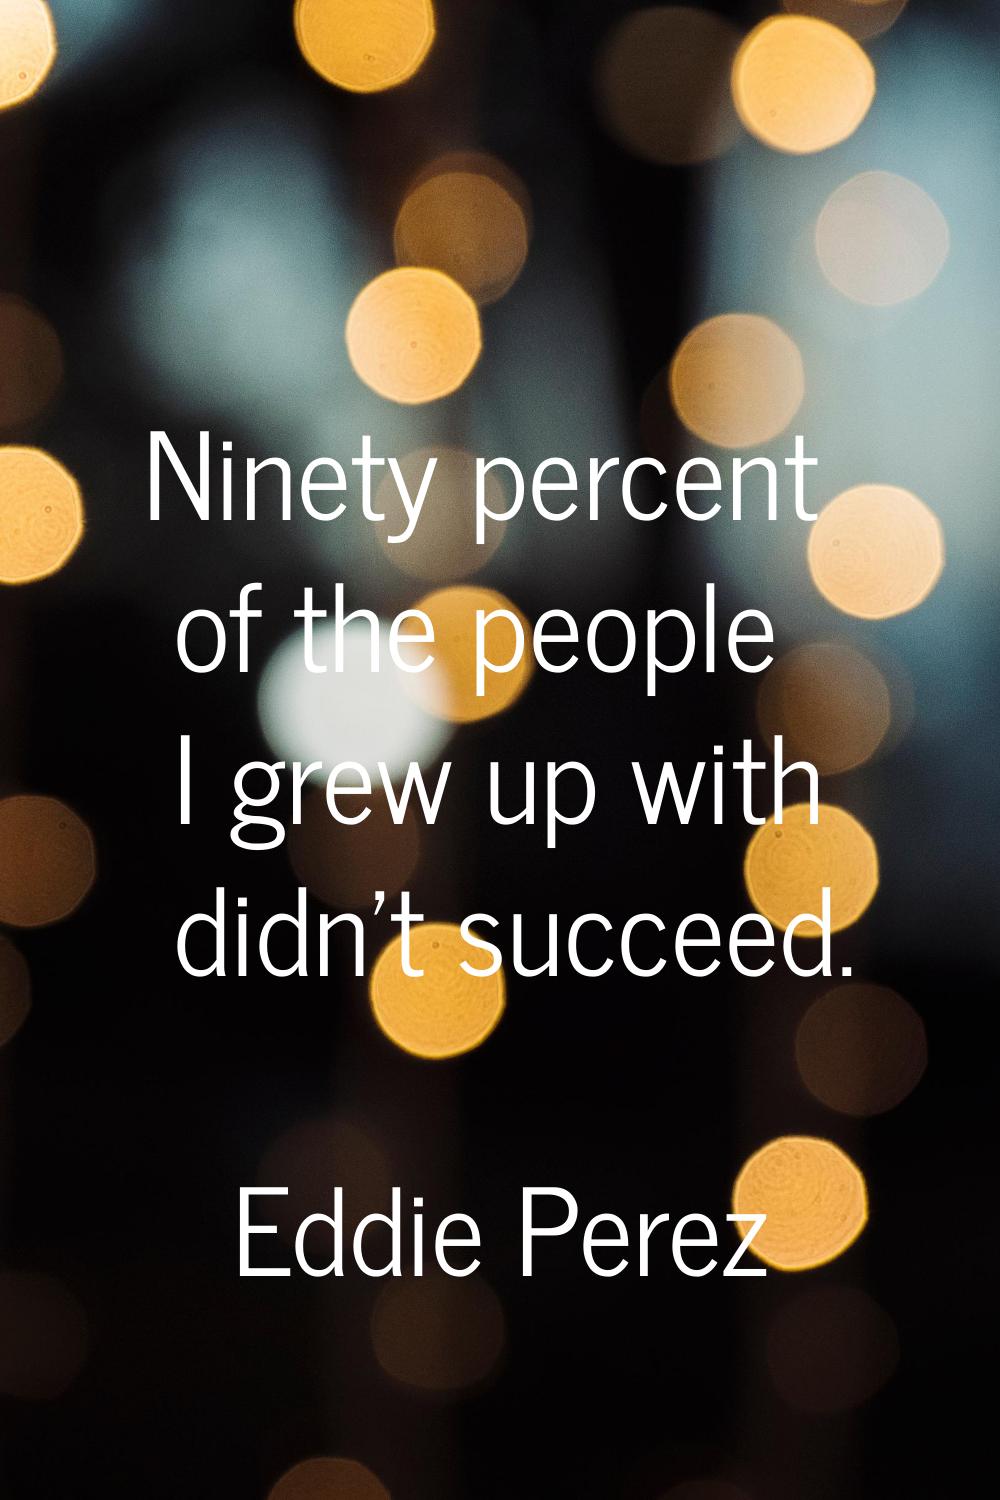 Ninety percent of the people I grew up with didn't succeed.